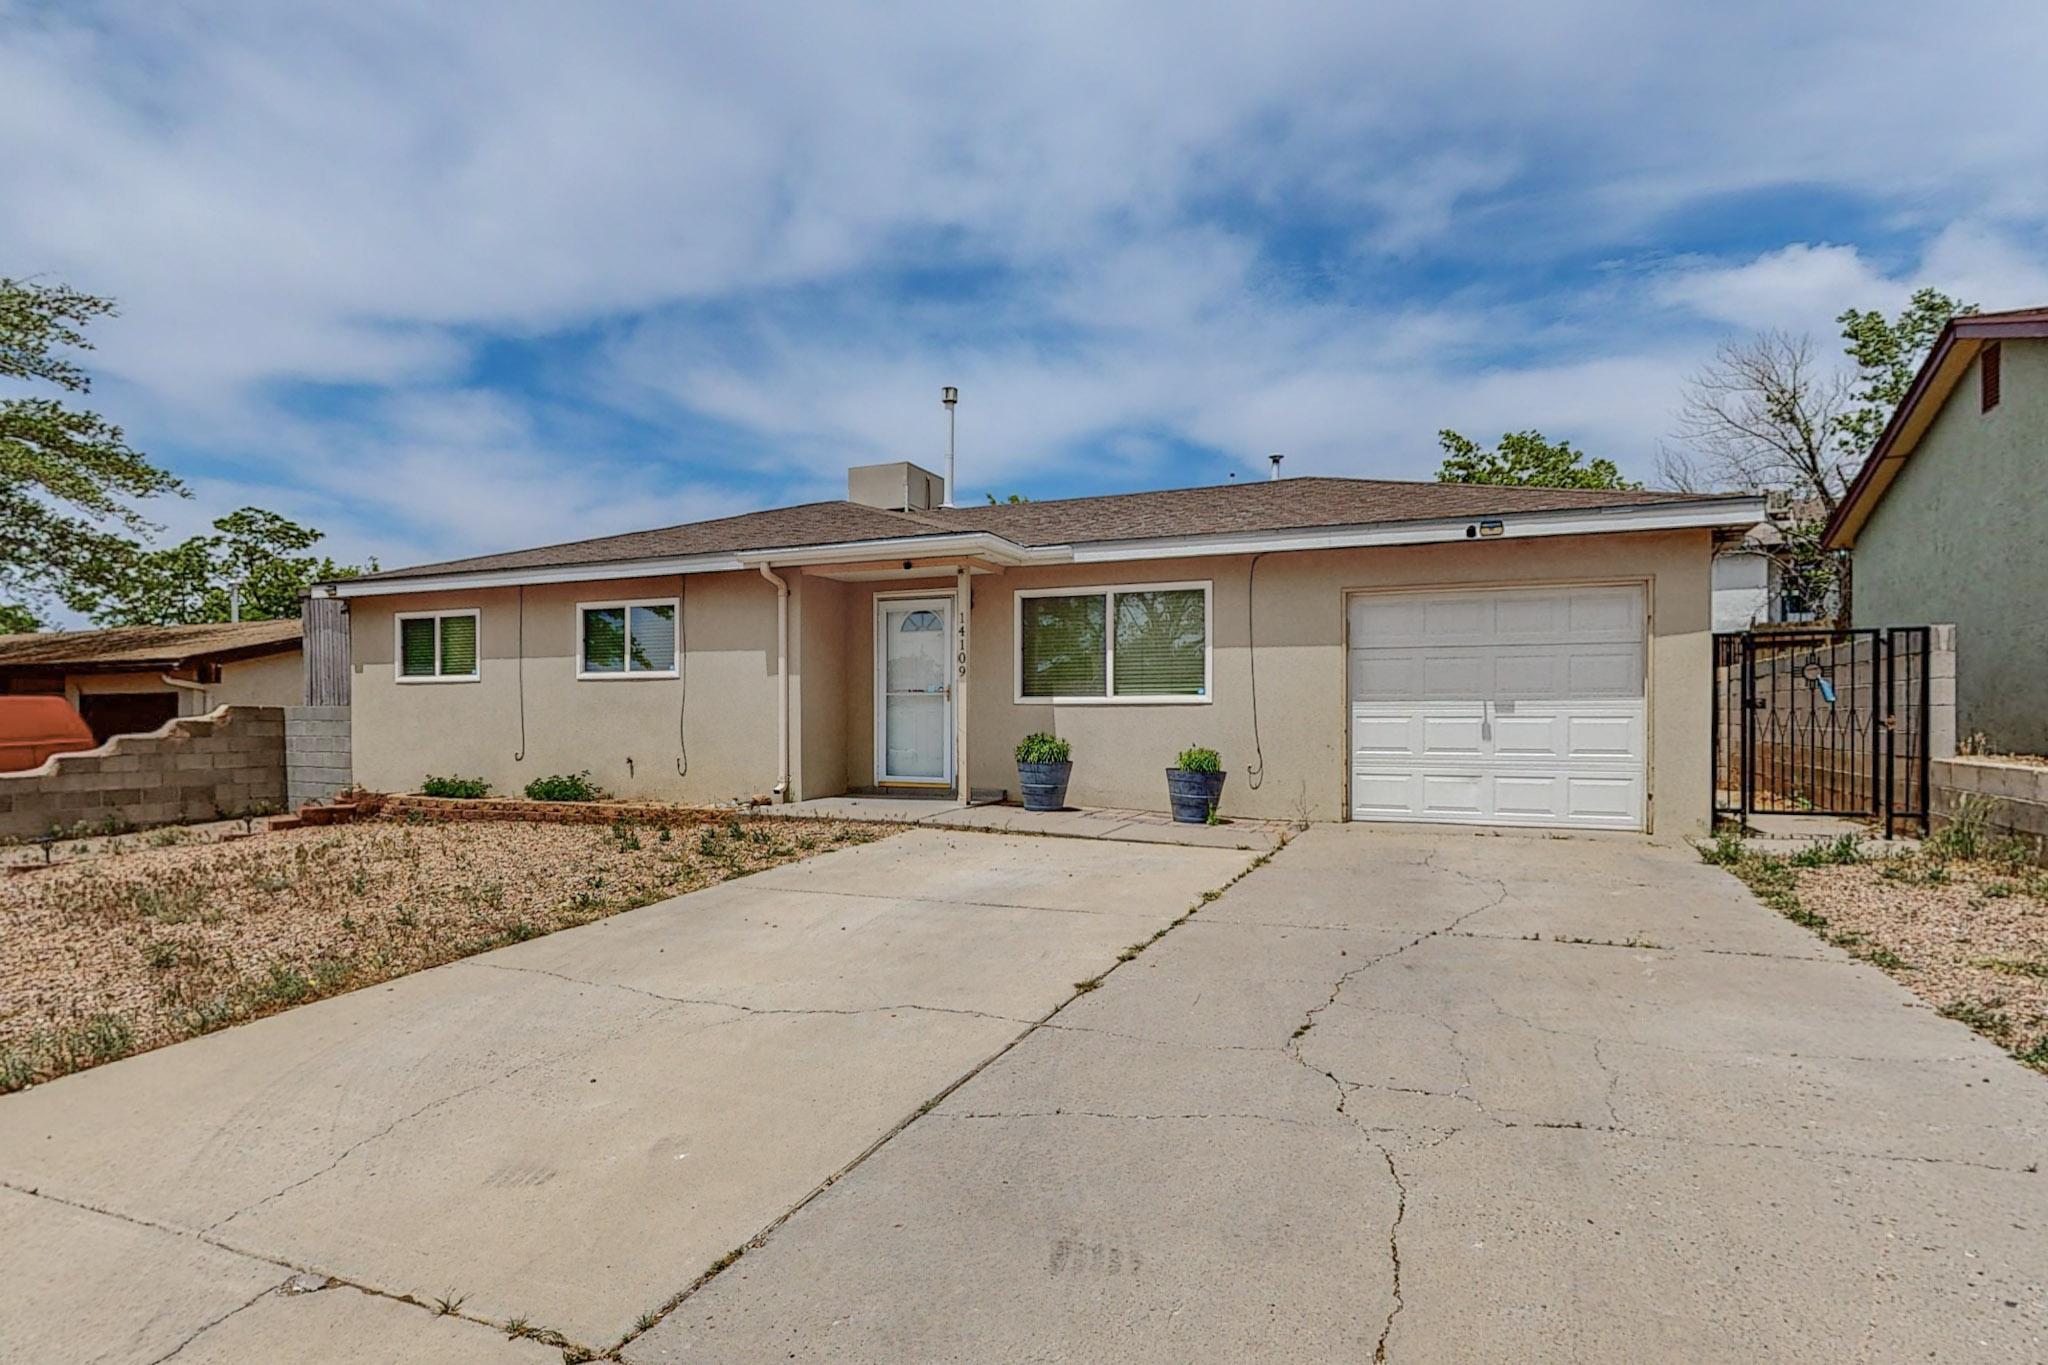 Welcome to this charming 3-bedroom residence that highlights granite countertops, tall fencing surrounding the backyard for privacy, and convenient access to a nearby park within walking distance.Don't miss out on this gem.